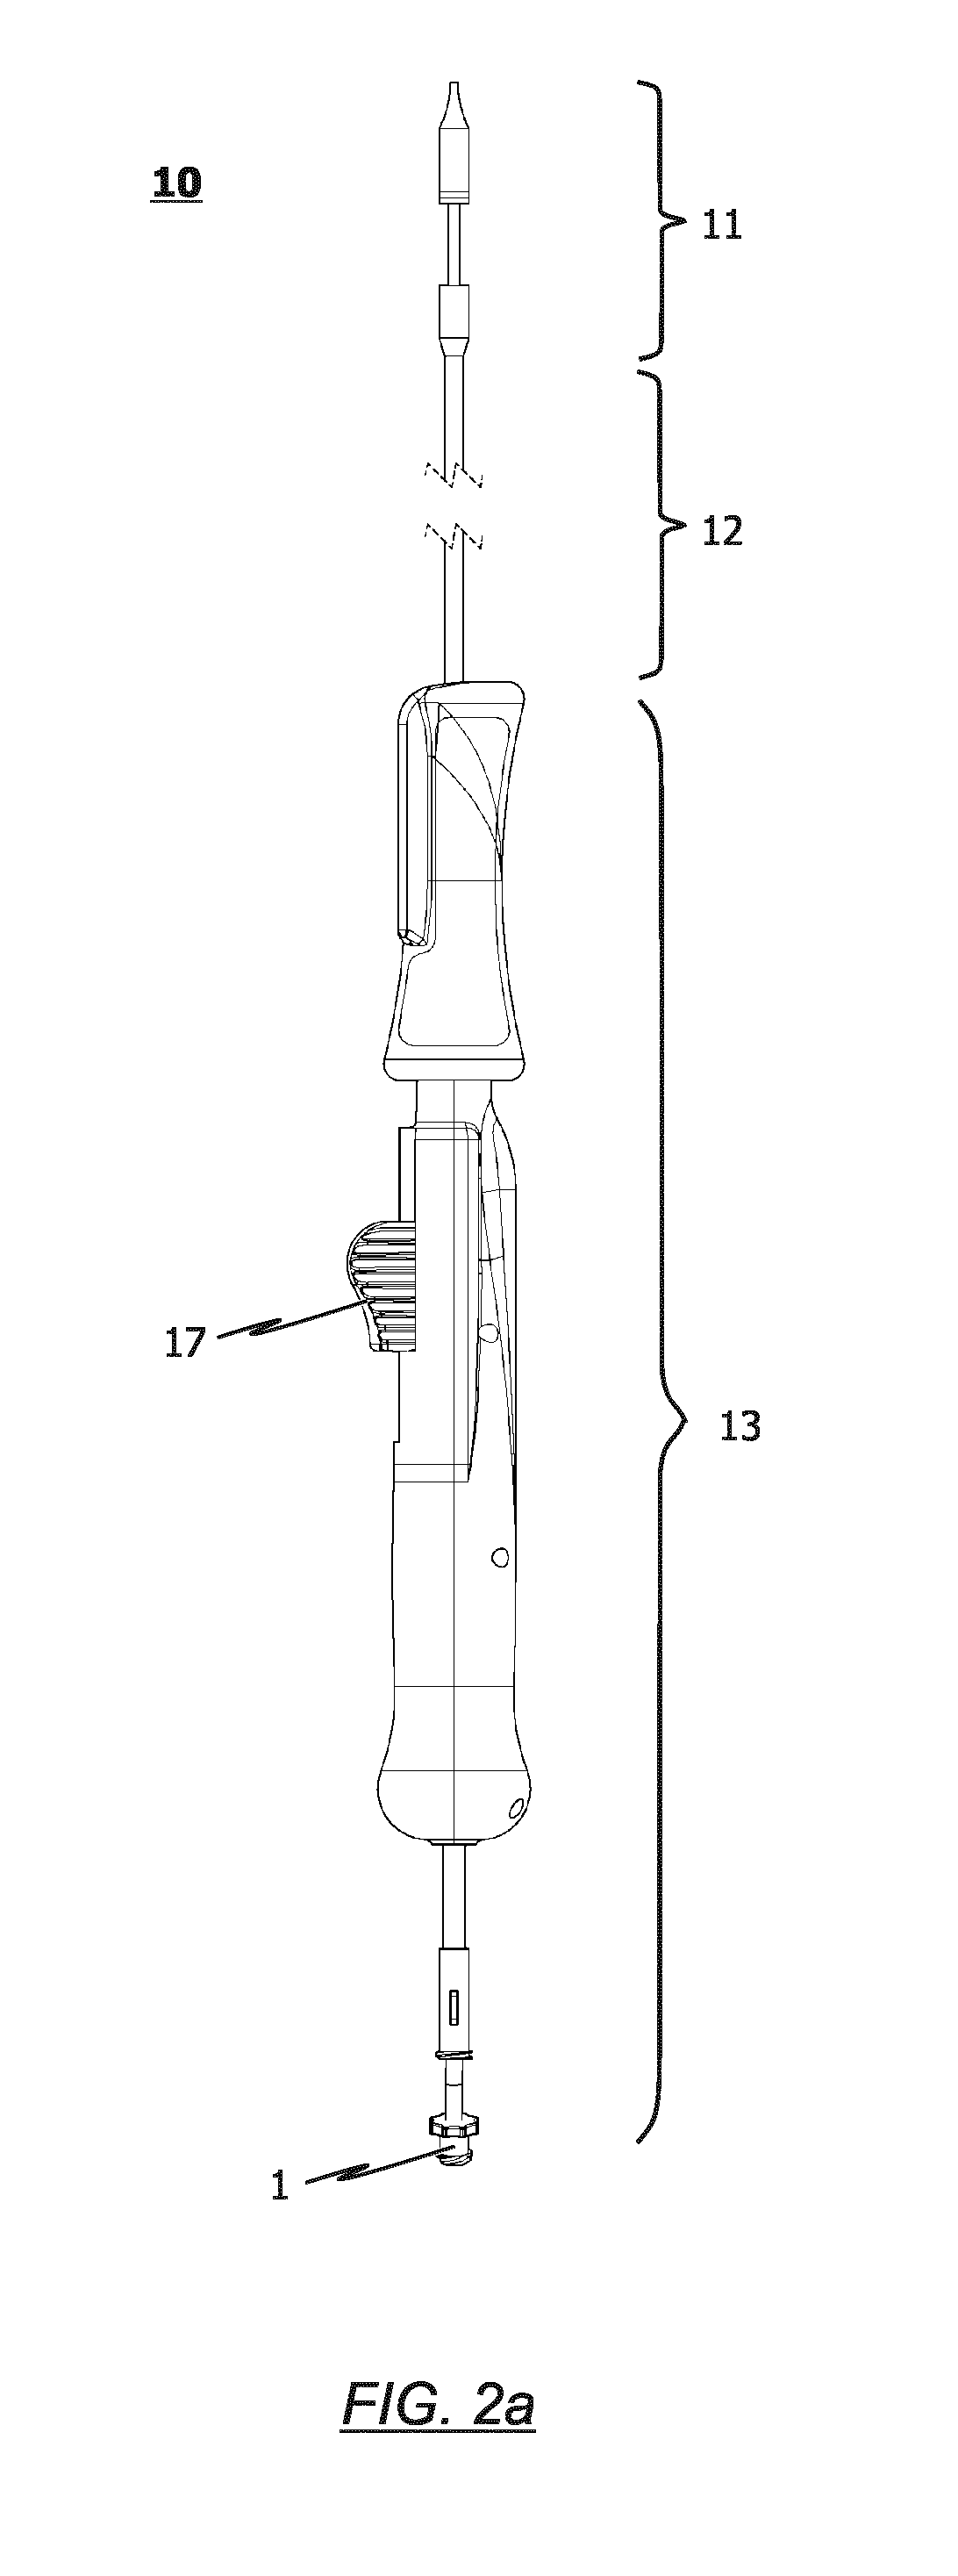 Heart valve prosthesis delivery system and method for delivery of heart valve prosthesis with introducer sheath